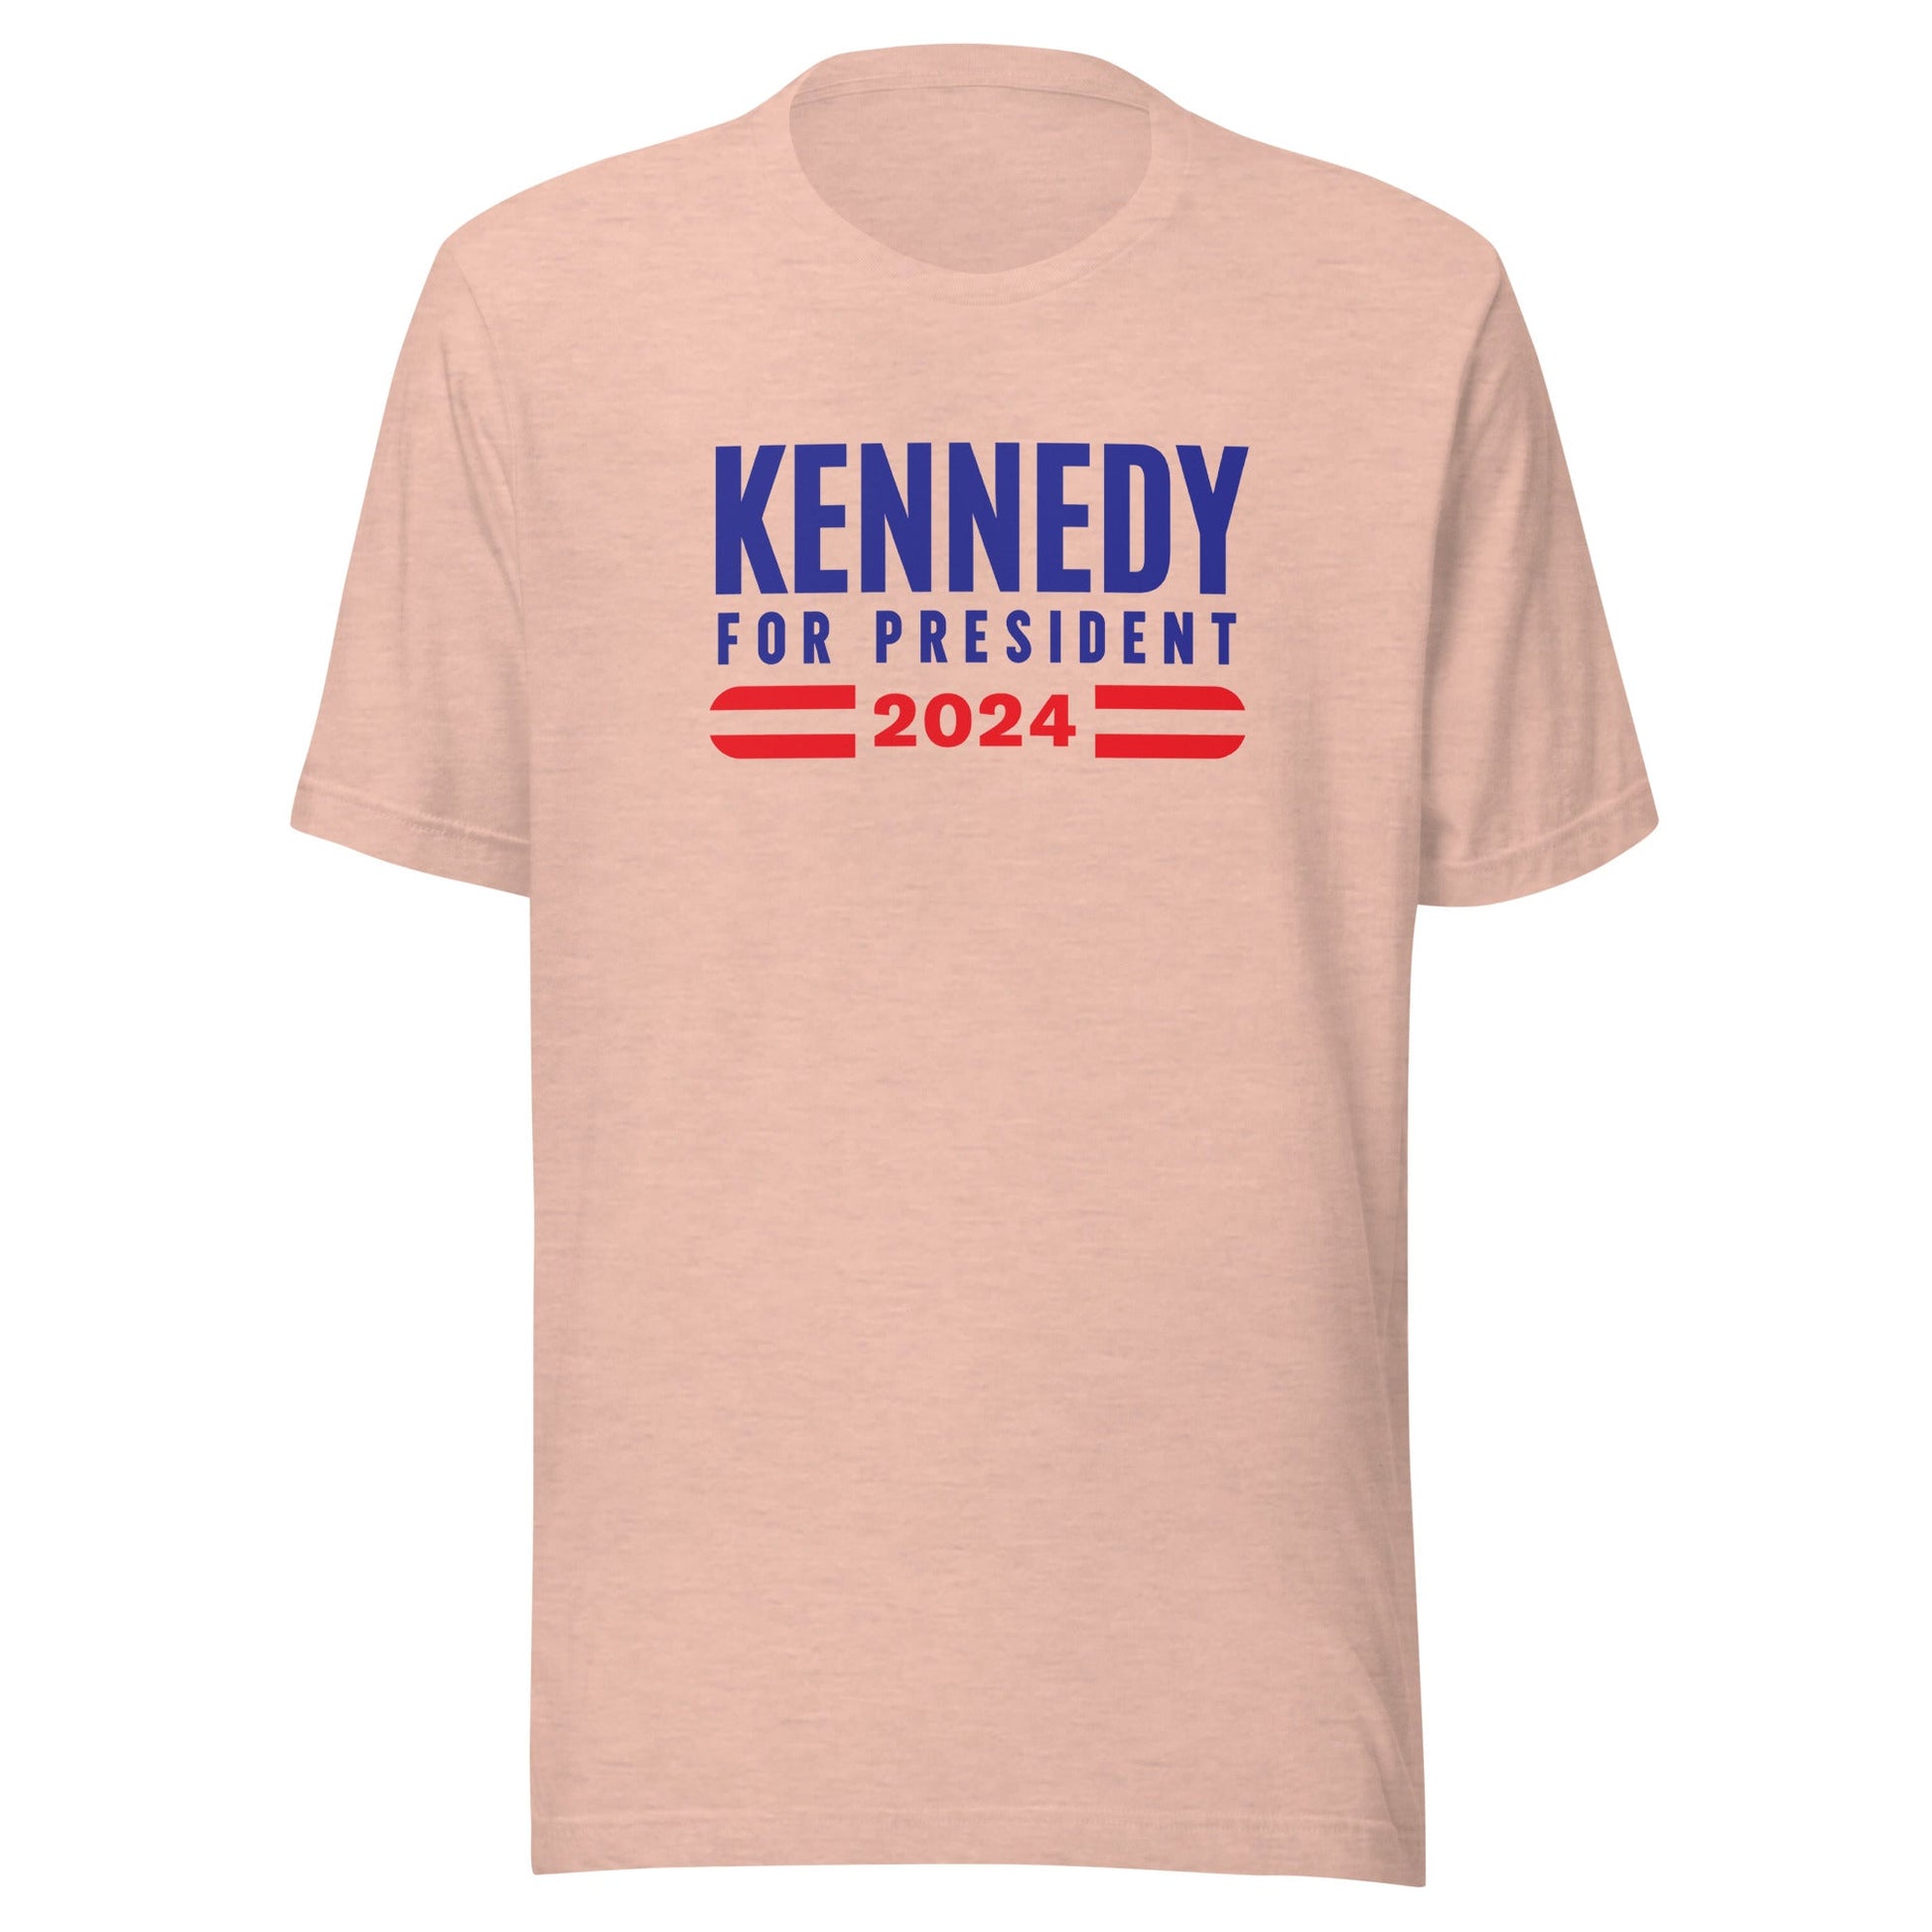 Kennedy for President 2024 Unisex Tee - TEAM KENNEDY. All rights reserved